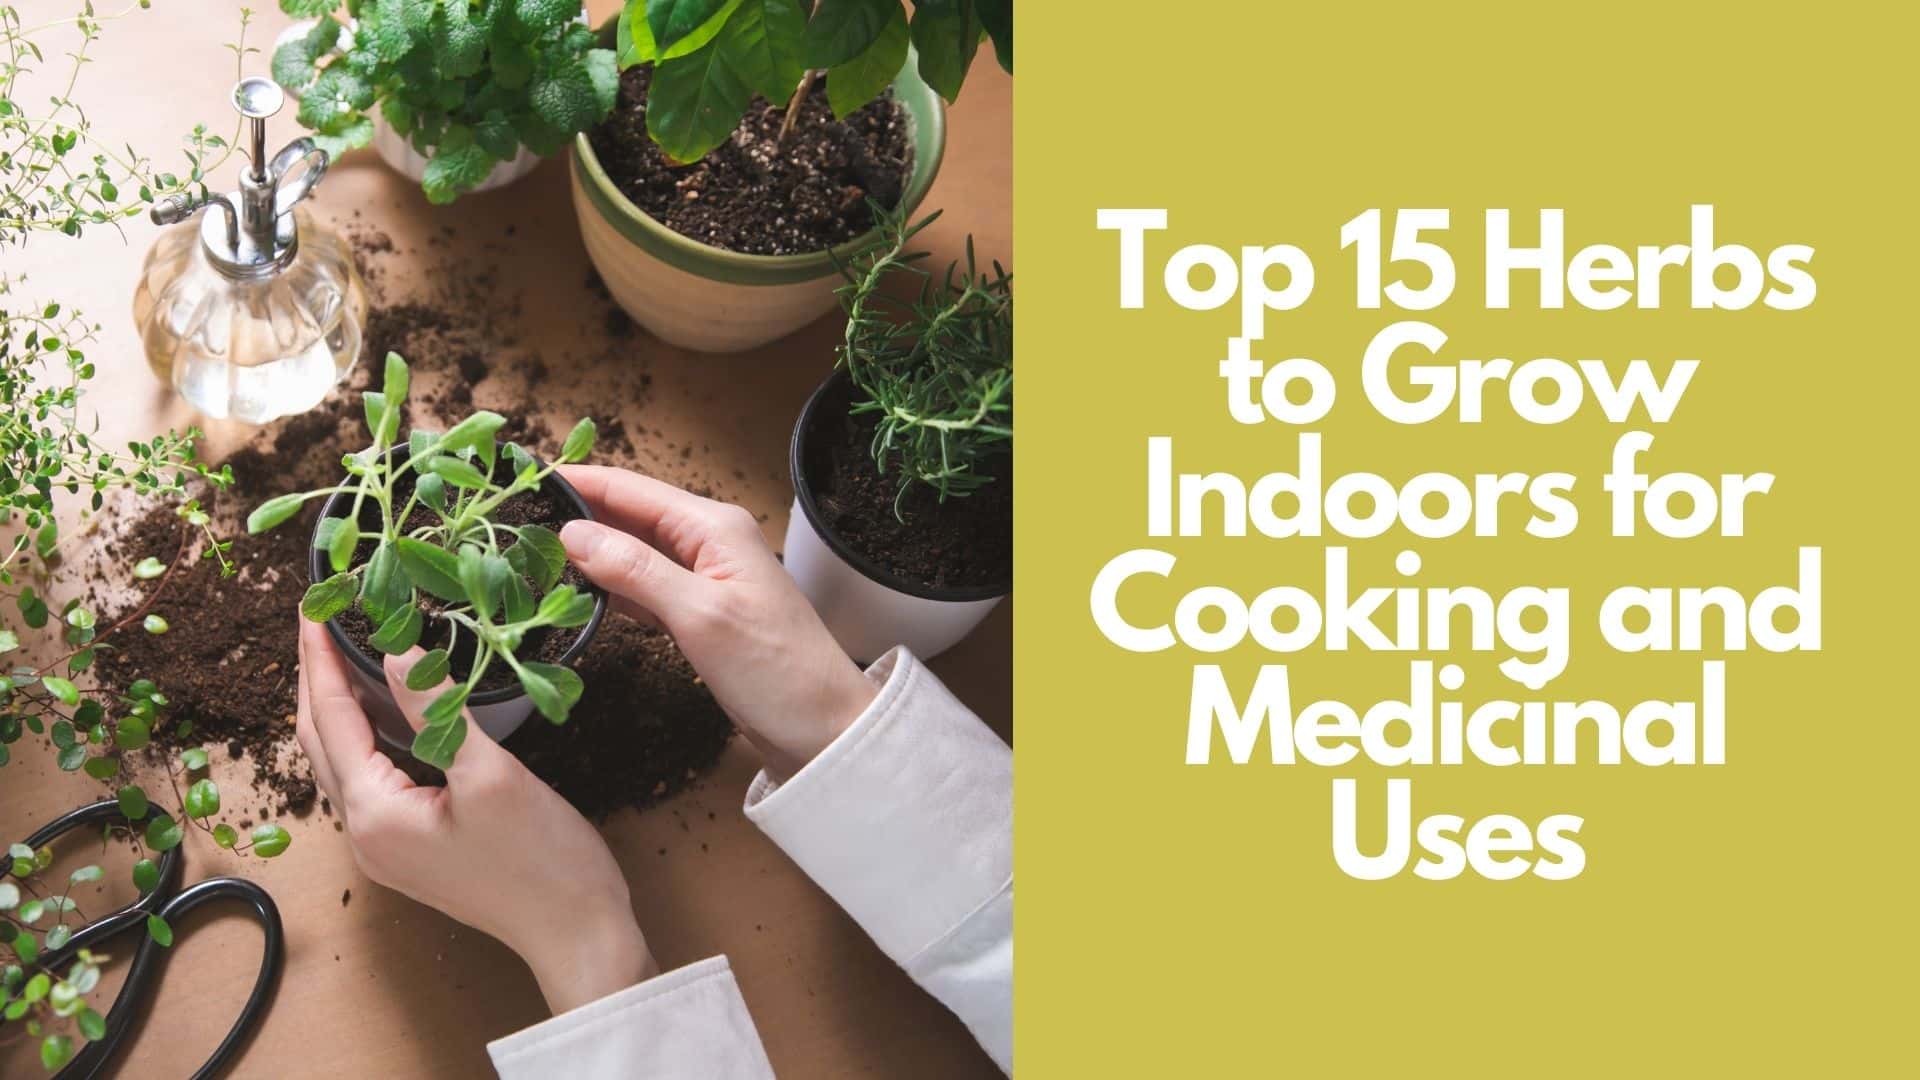 Top 15 Herbs to Grow Indoors for Cooking and Medicinal Uses